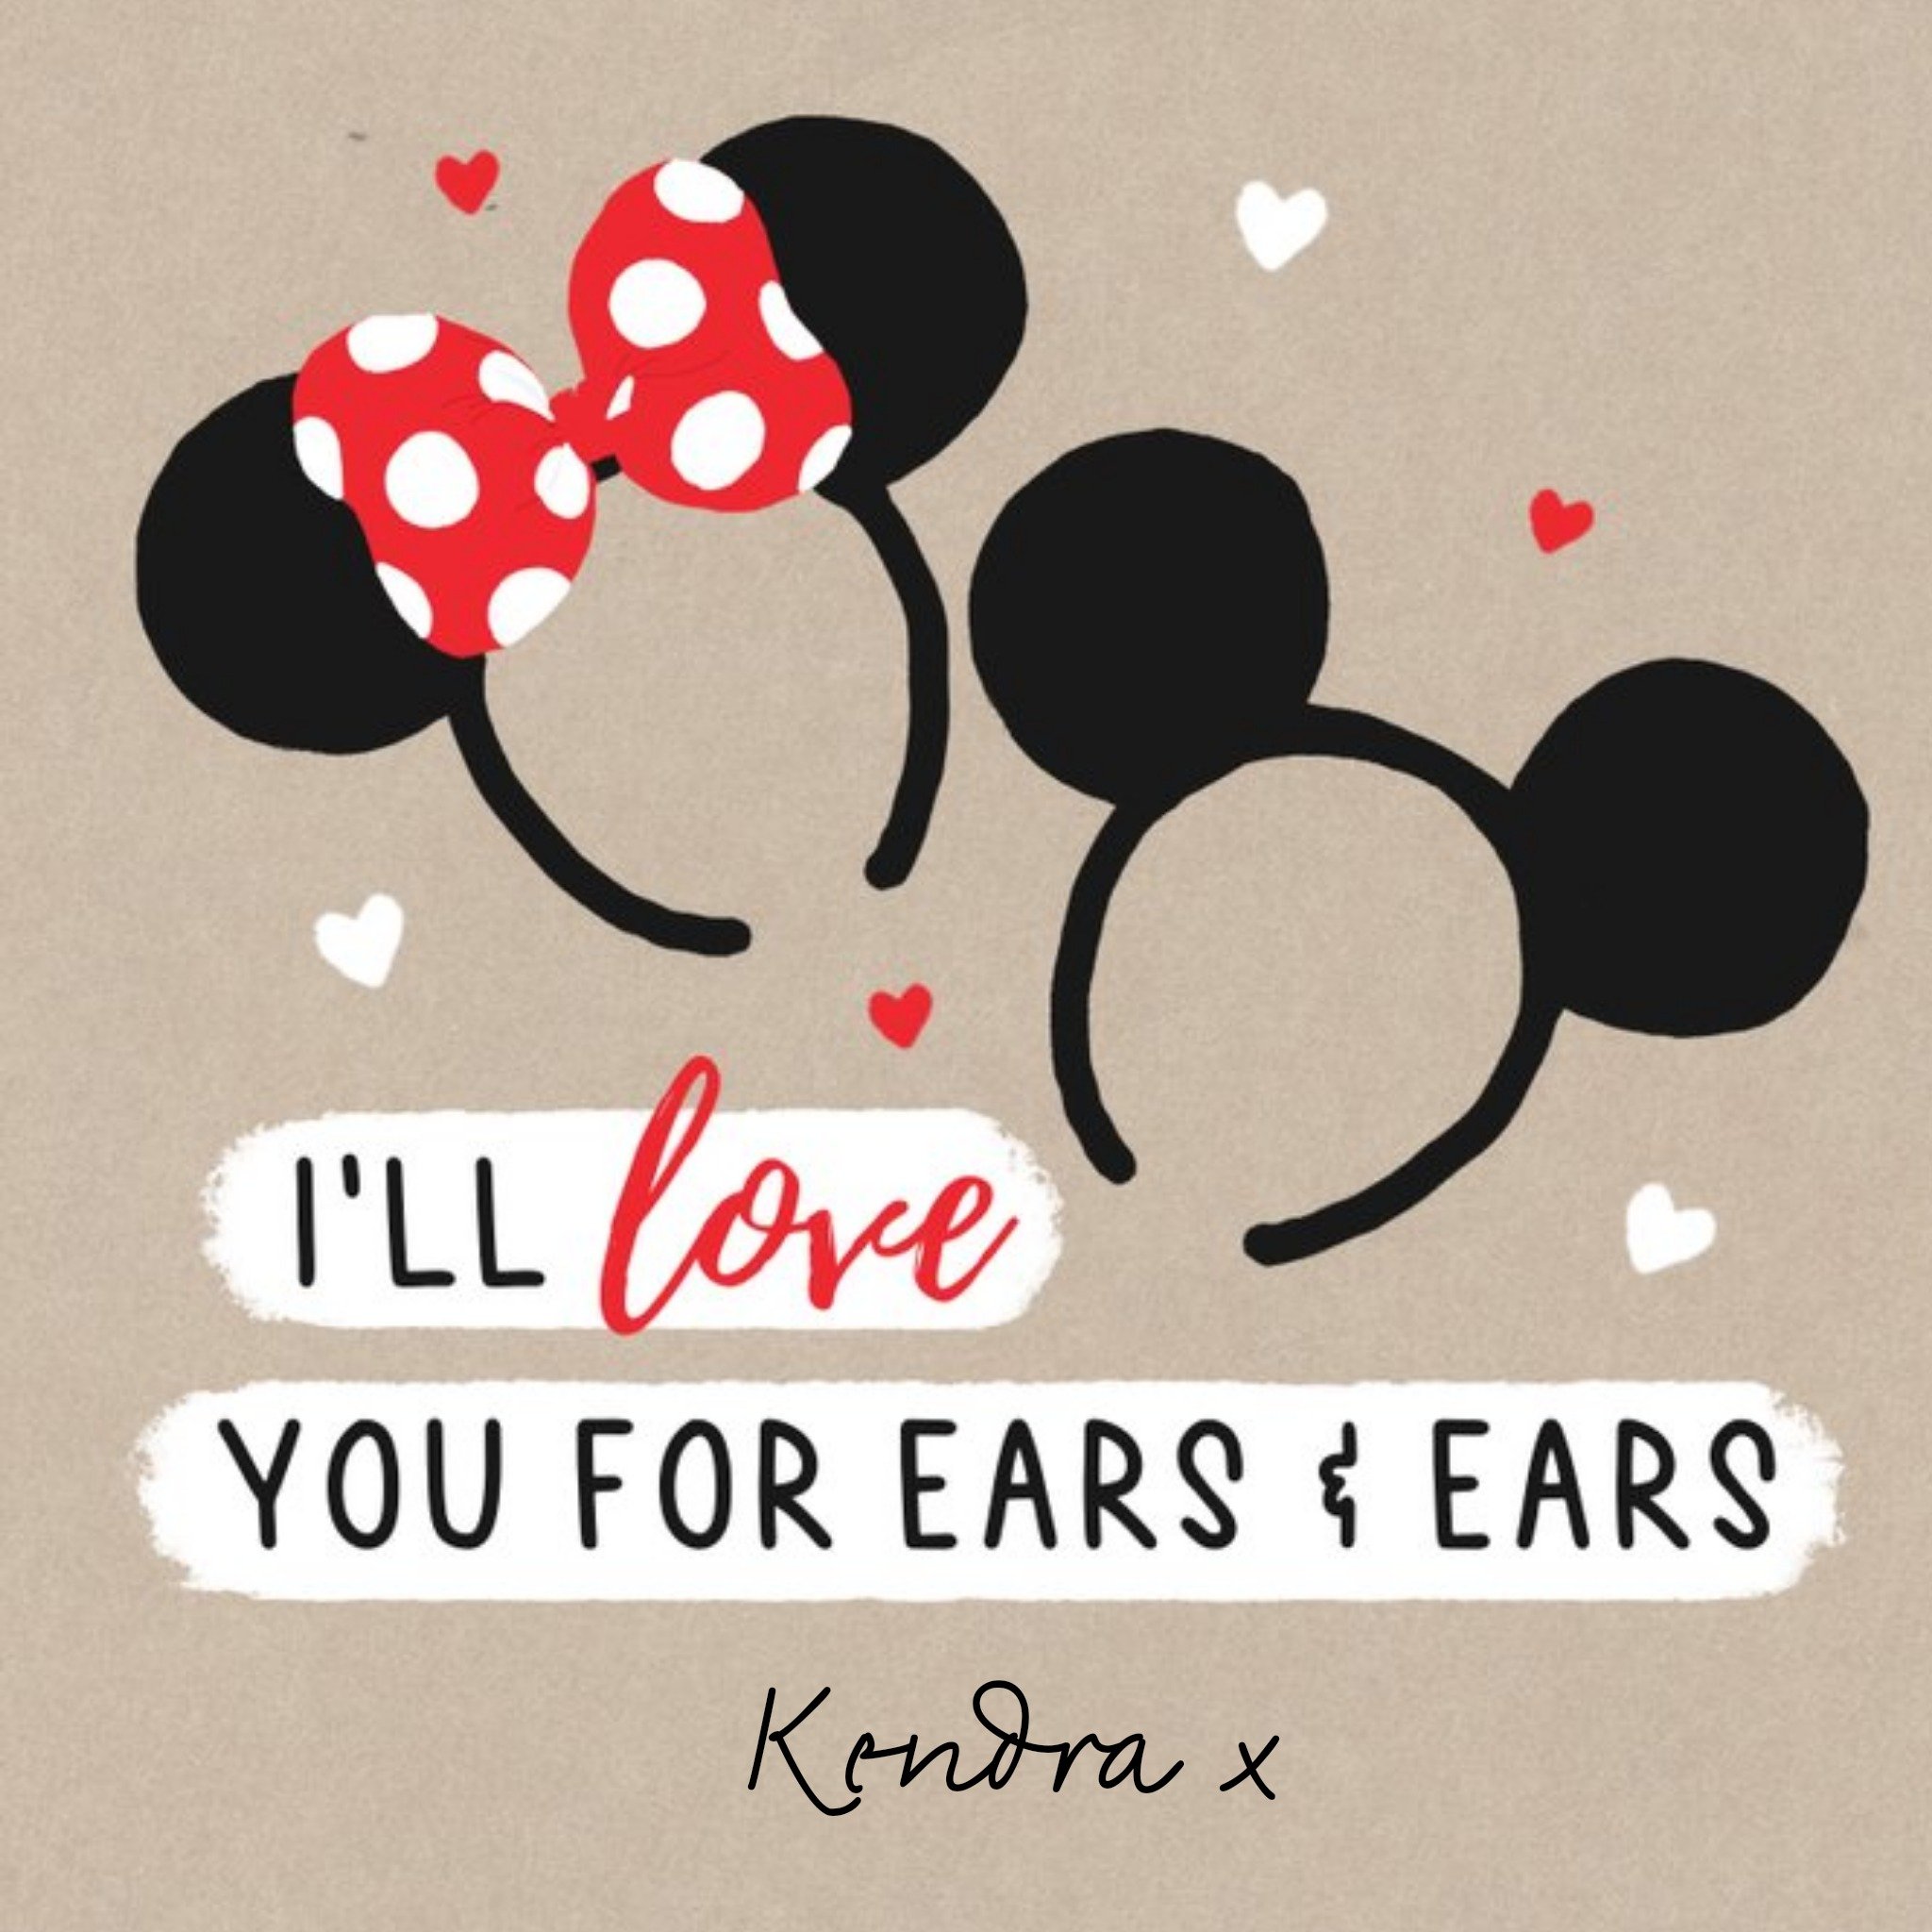 Mickey Mouse Disney I'll Love You For Ears & Ears Card, Large